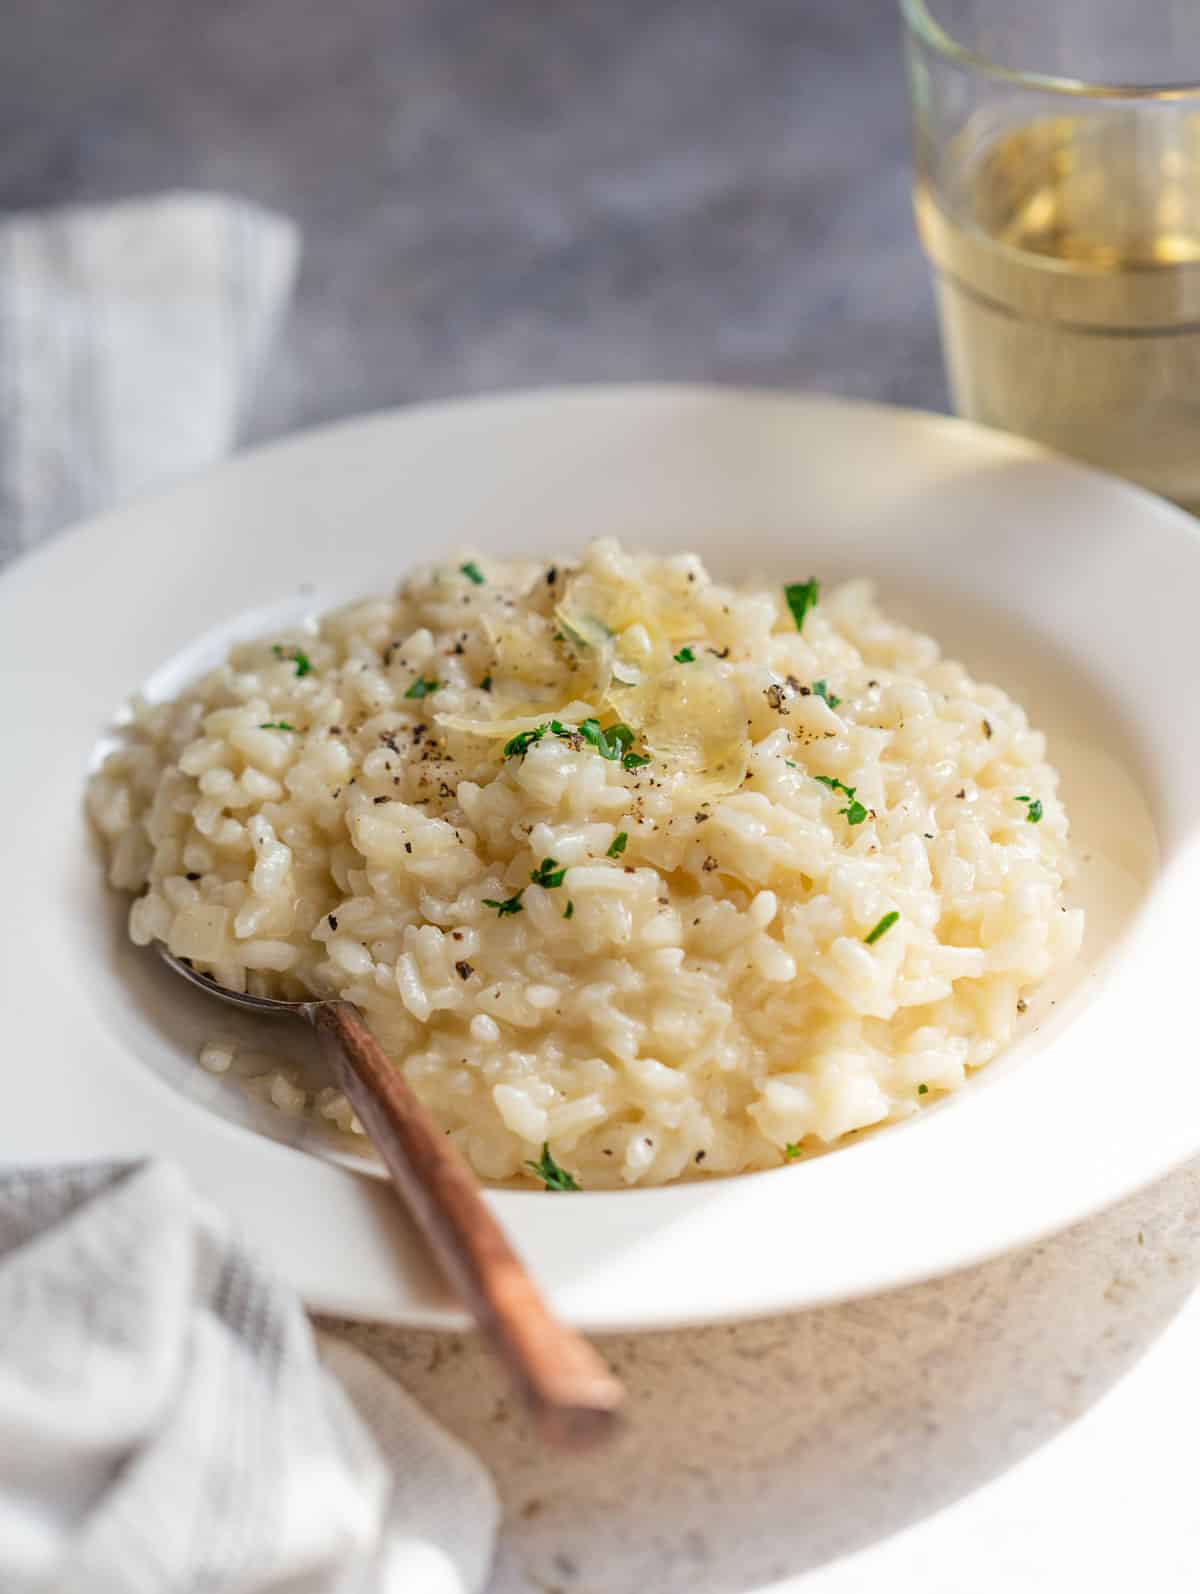 Prosecco Risotto (with sparkling wine) in a serving dish